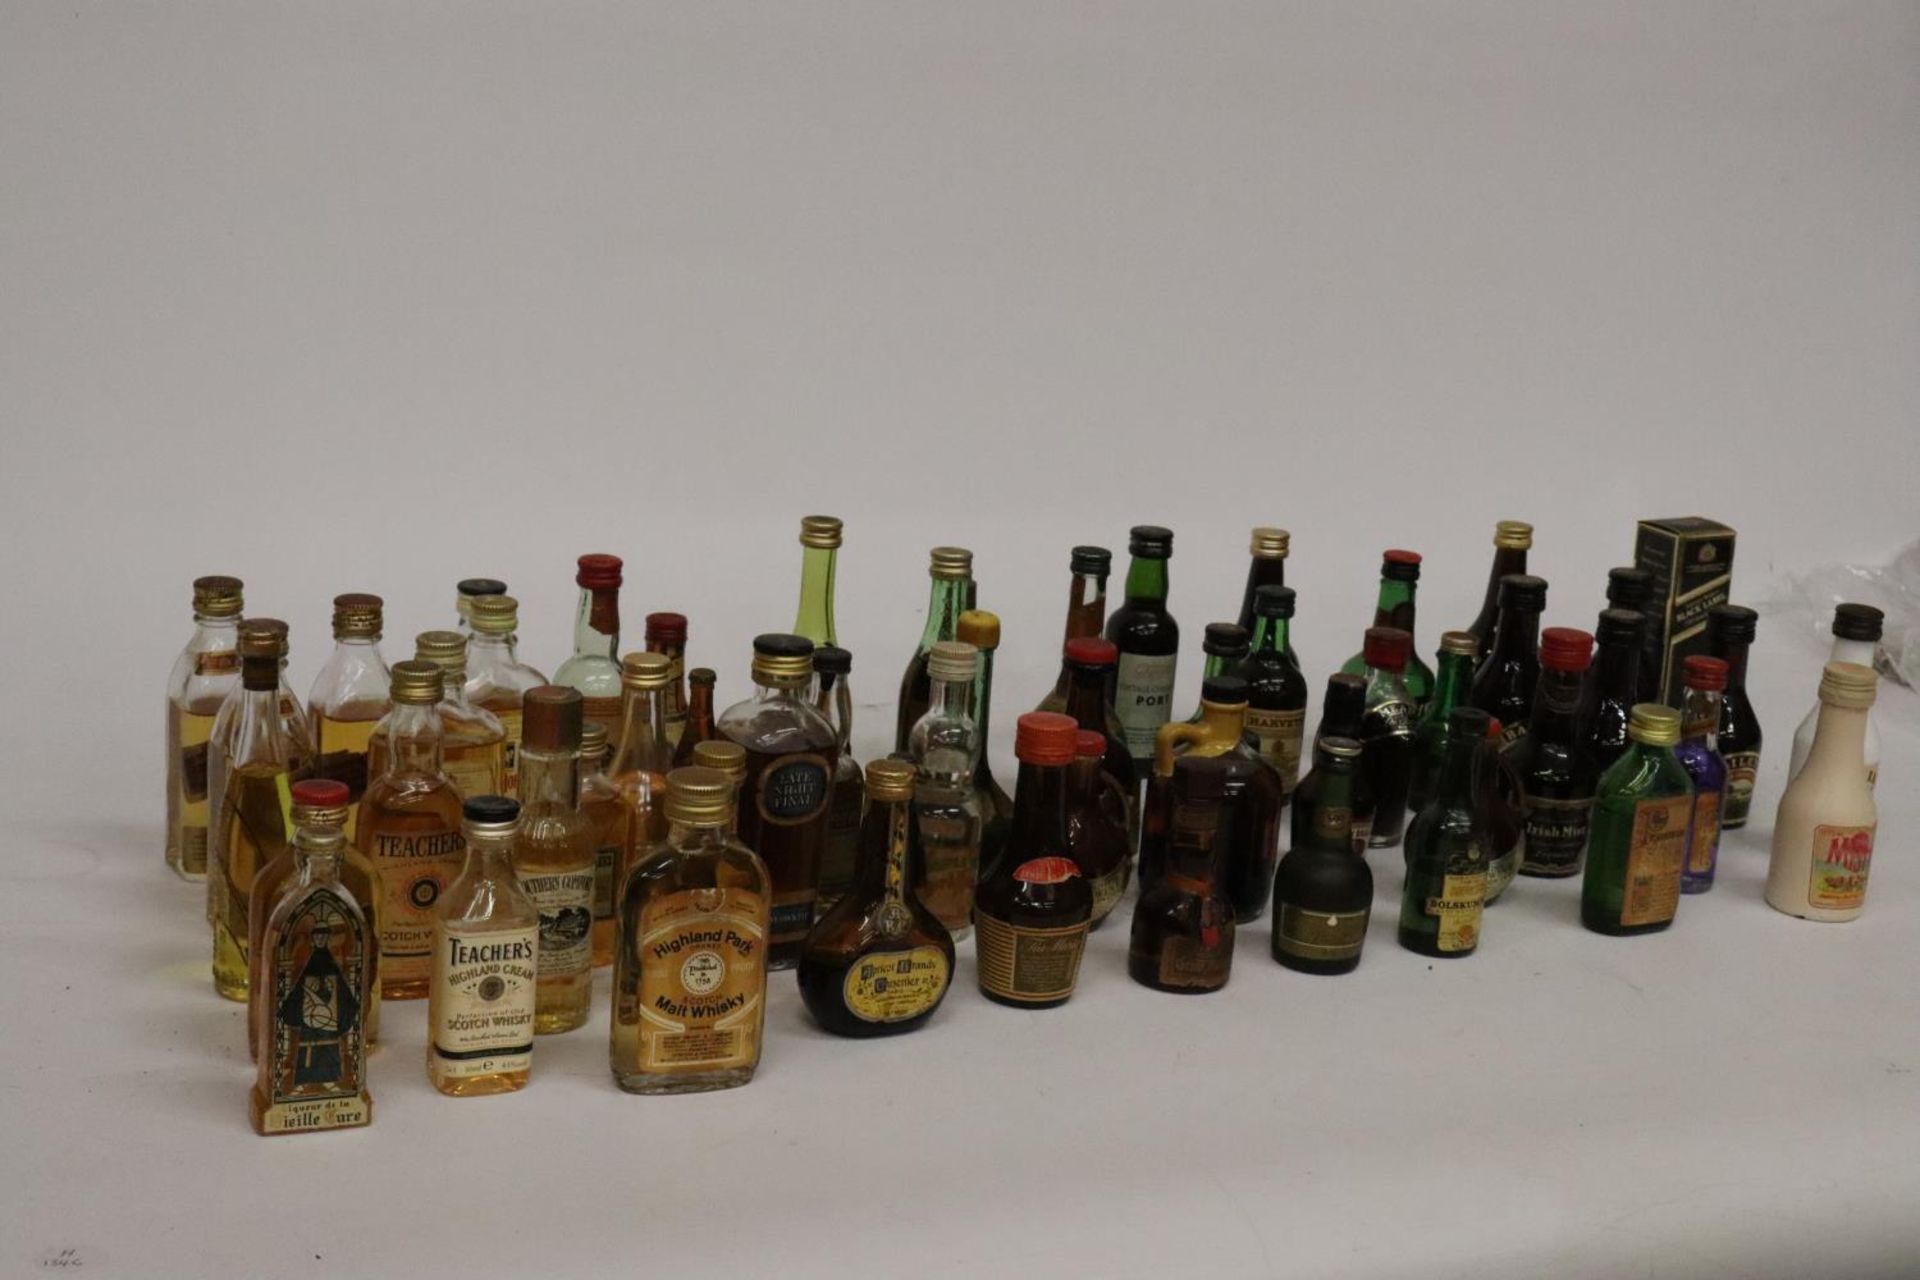 A LARGE QUANTITY OF MINIATURE BOTTLES OF ALCOHOL - Image 6 of 10